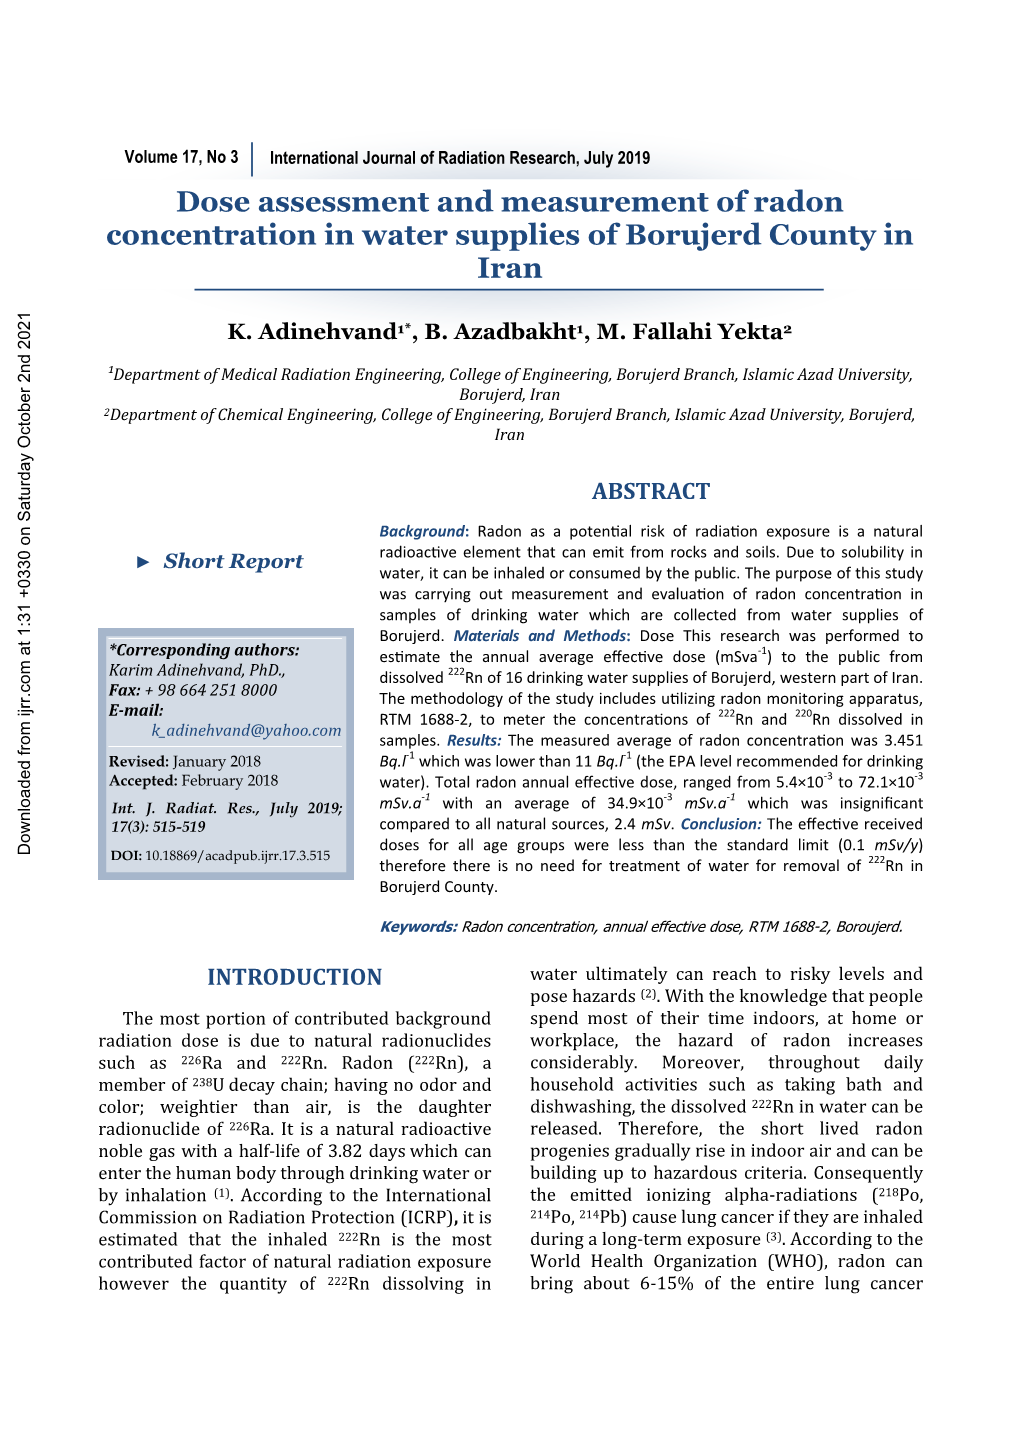 Dose Assessment and Measurement of Radon Concentration in Water Supplies of Borujerd County in Iran